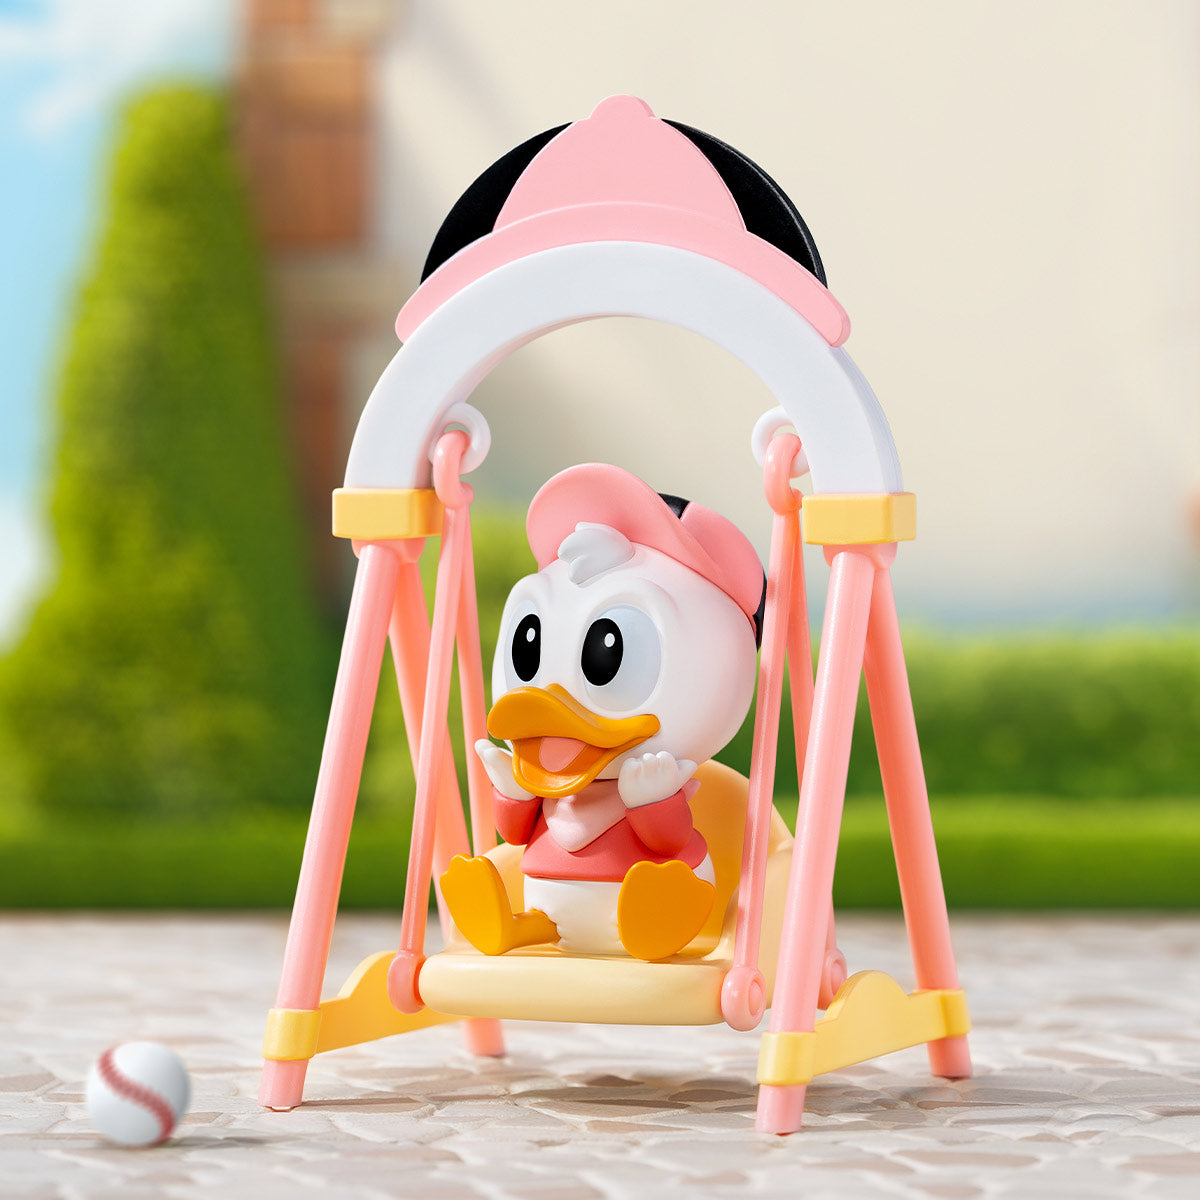 Toy duck on a swing from Disney Swing Blind Box Series, available for preorder at Strangecat Toys.